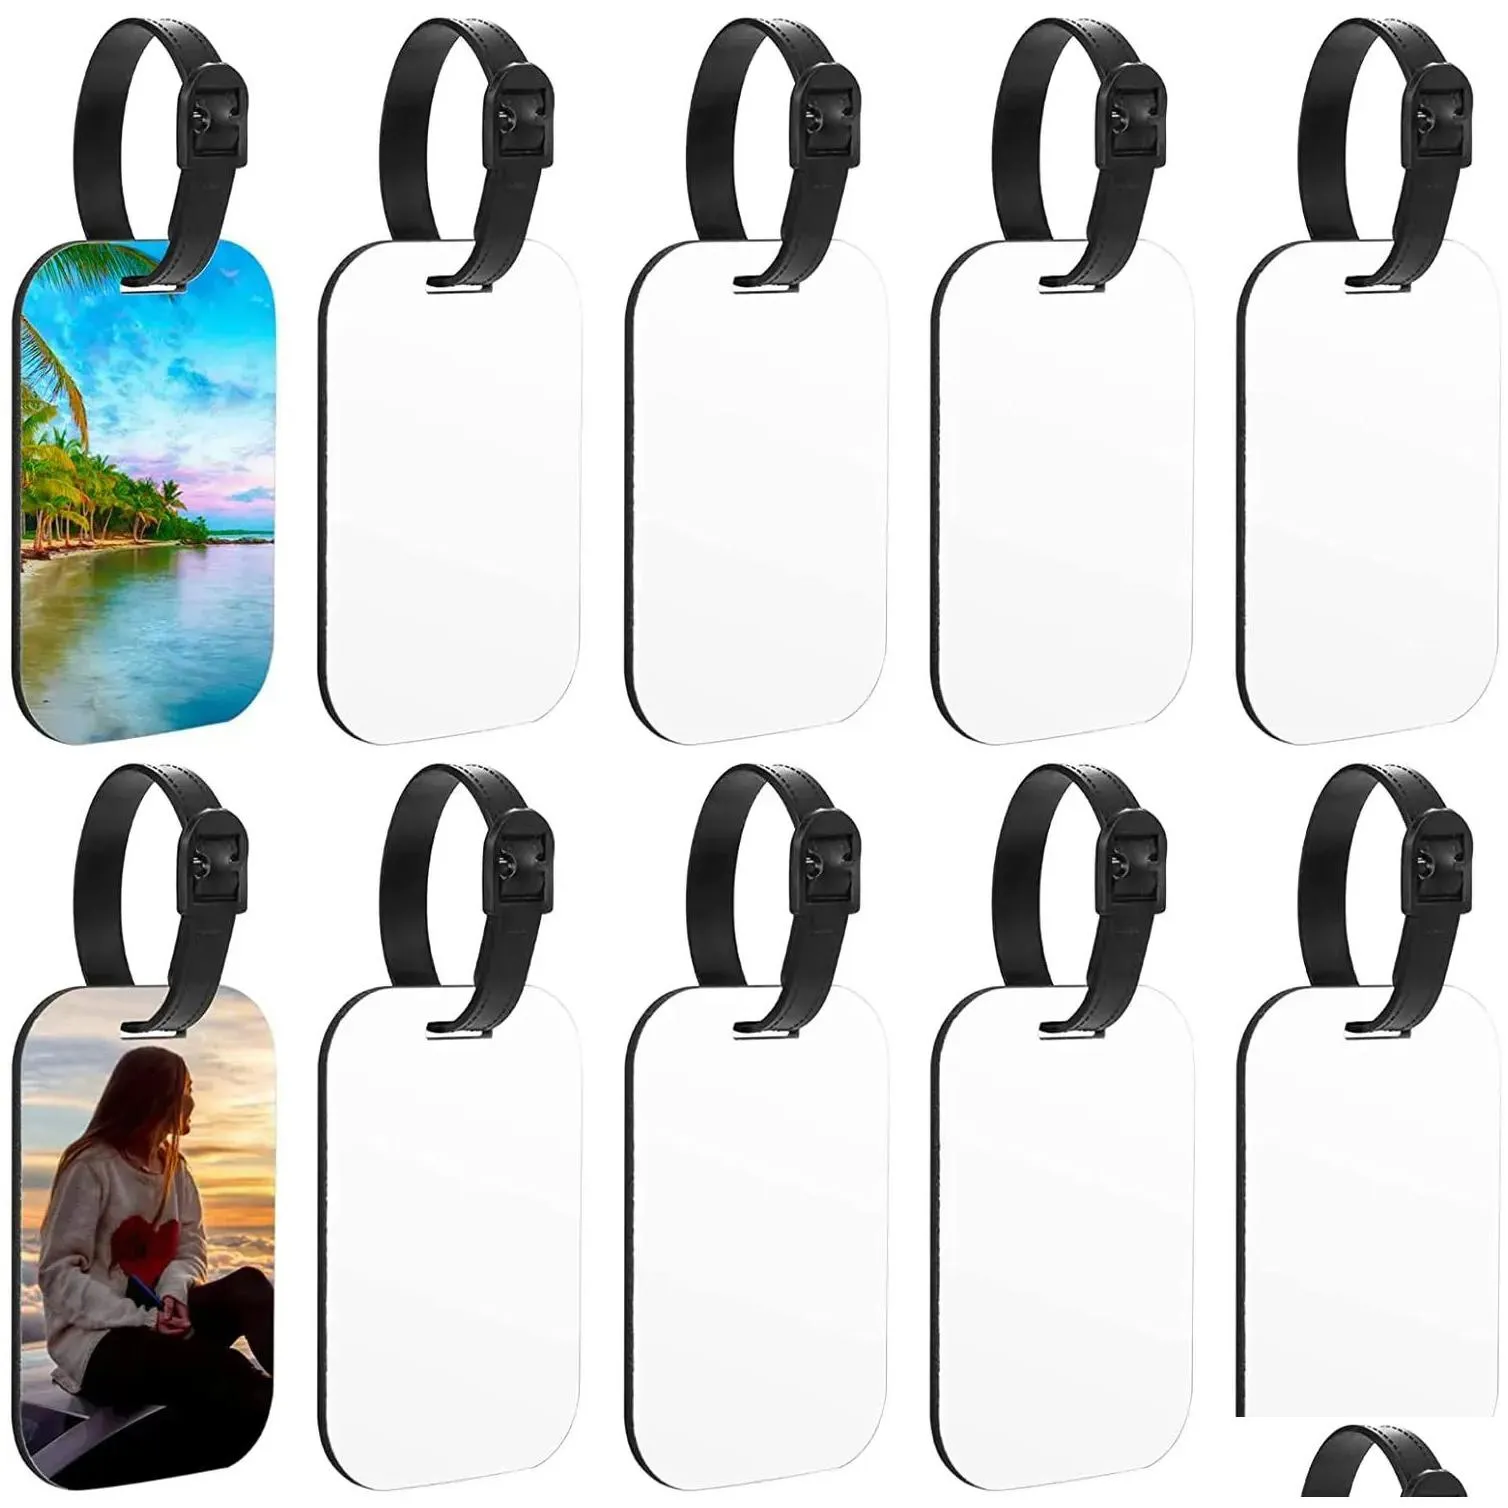 sublimation blanks neoprene luggage tags white blank travel tags with strap double sides suitcase label tag heat transfer diy name id card 4 x 2.75 inch